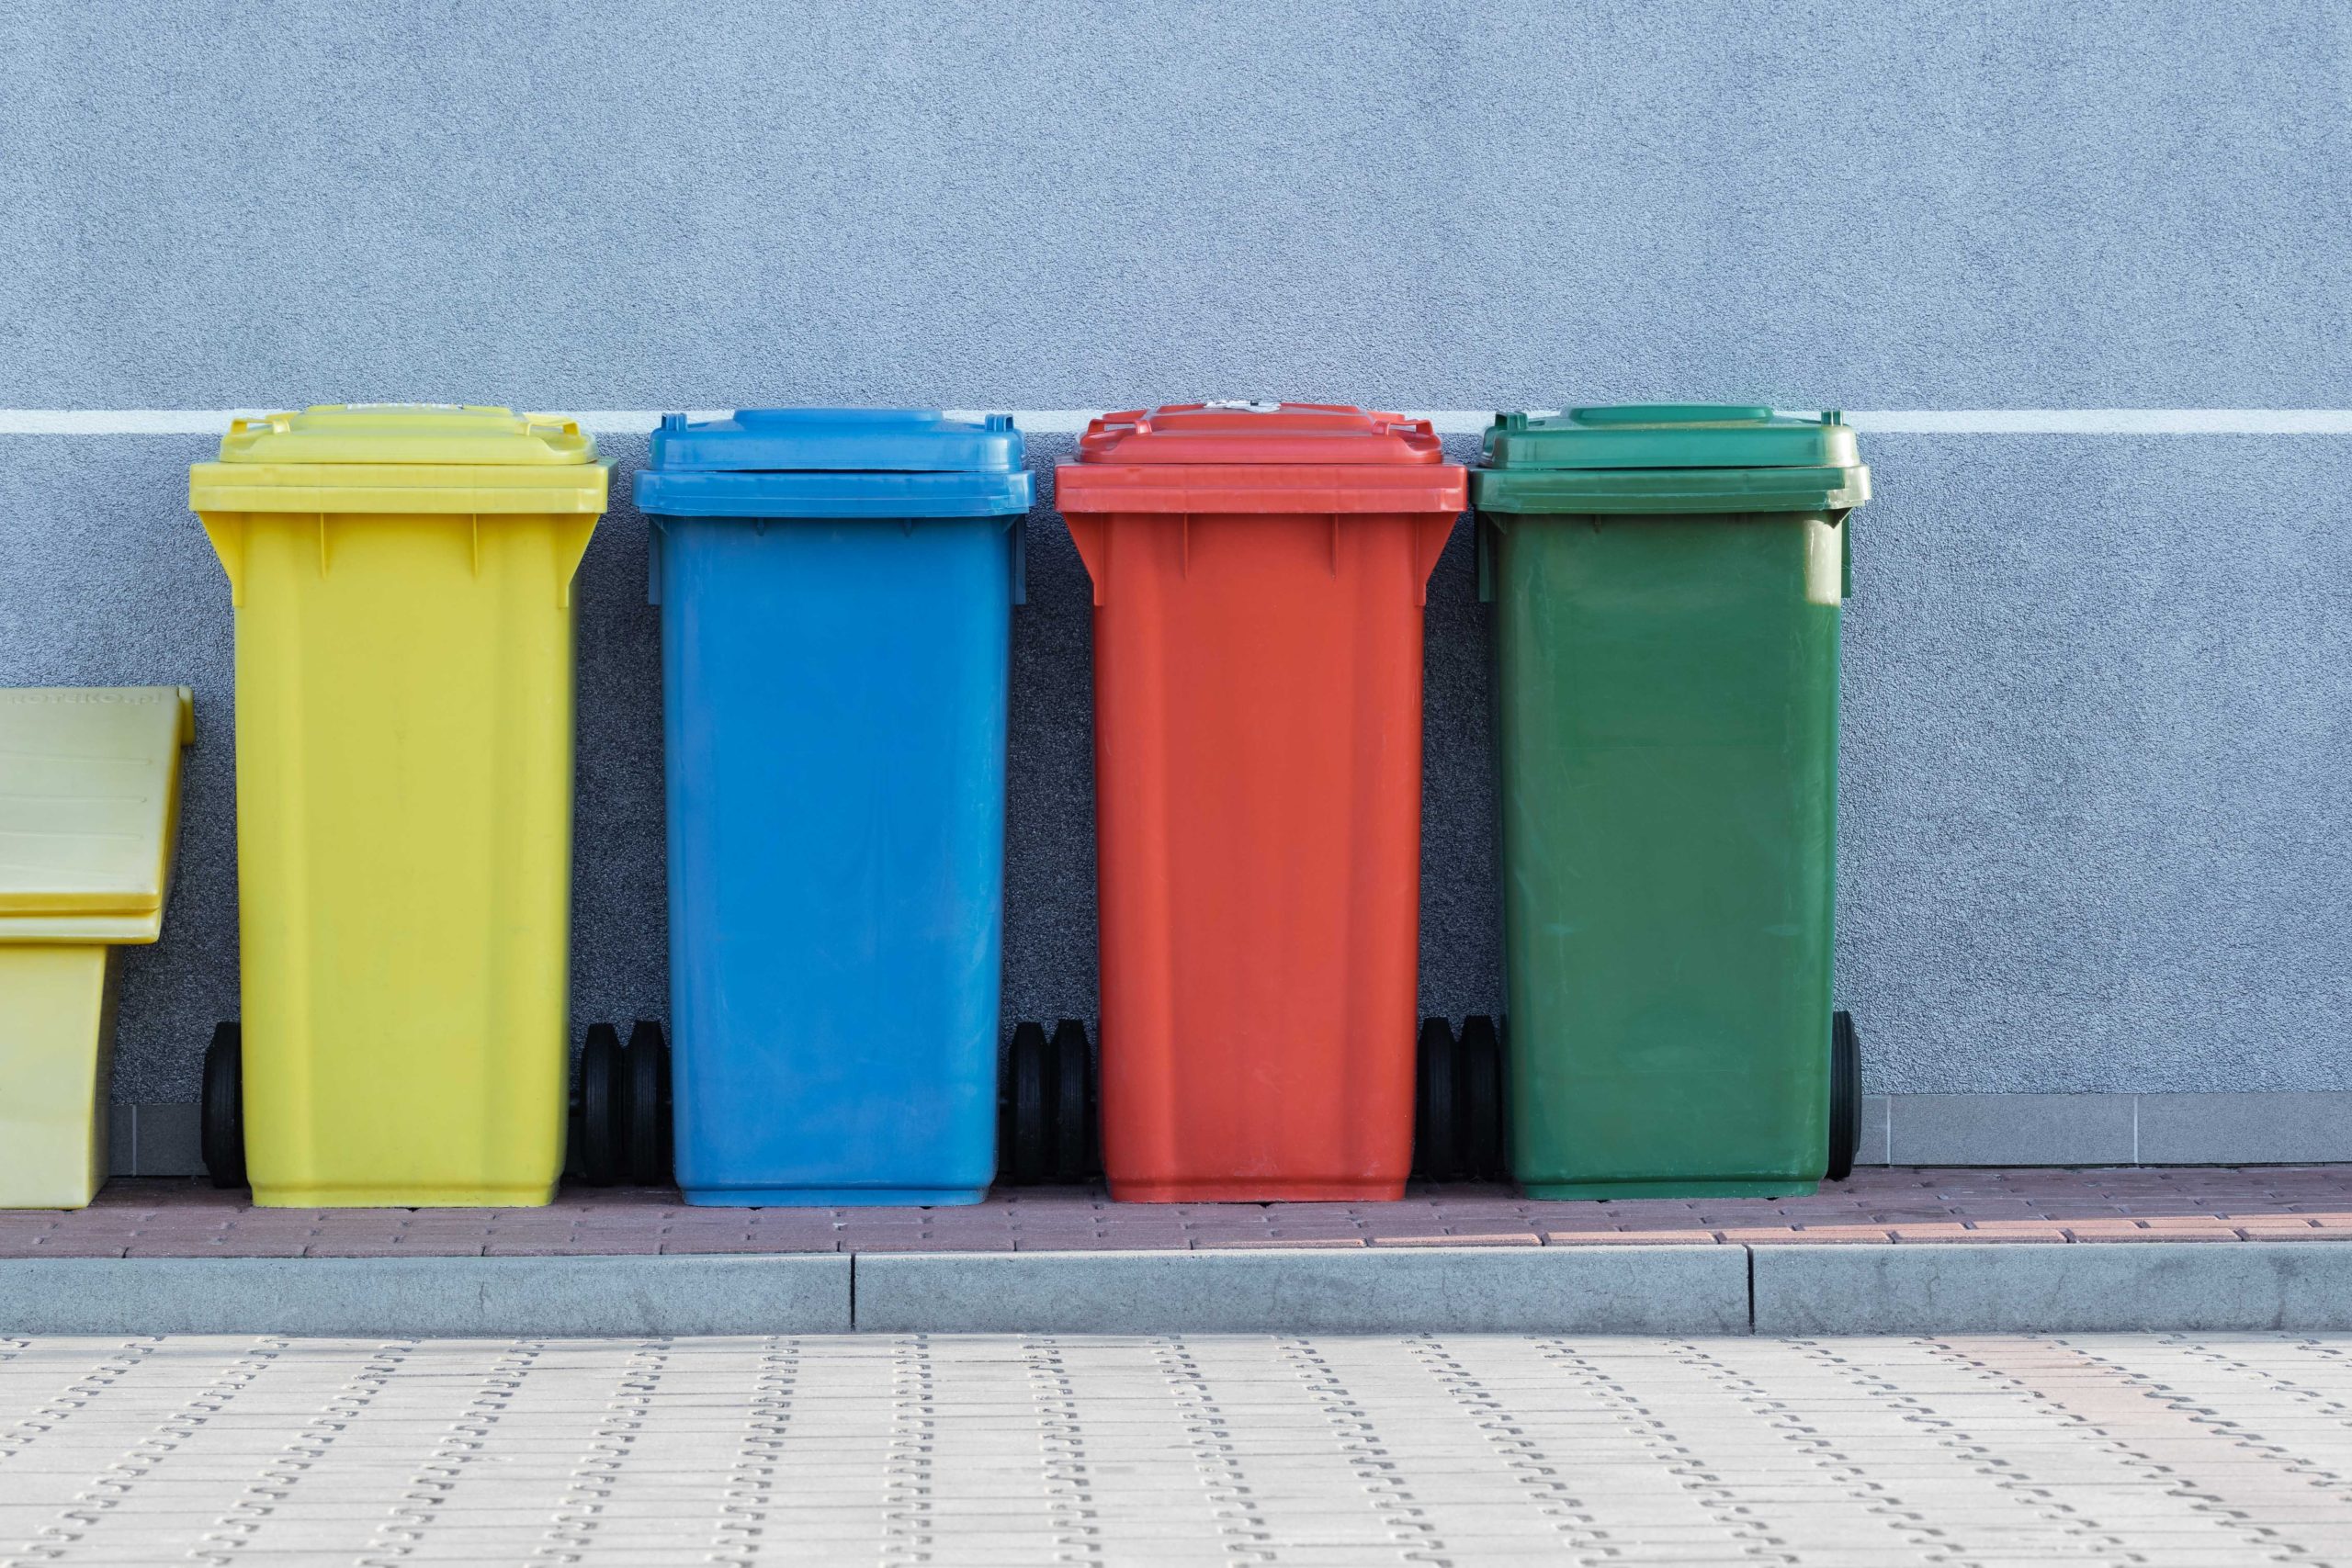 A row of colorful trash cans next to a wall, showcasing waste management principles.